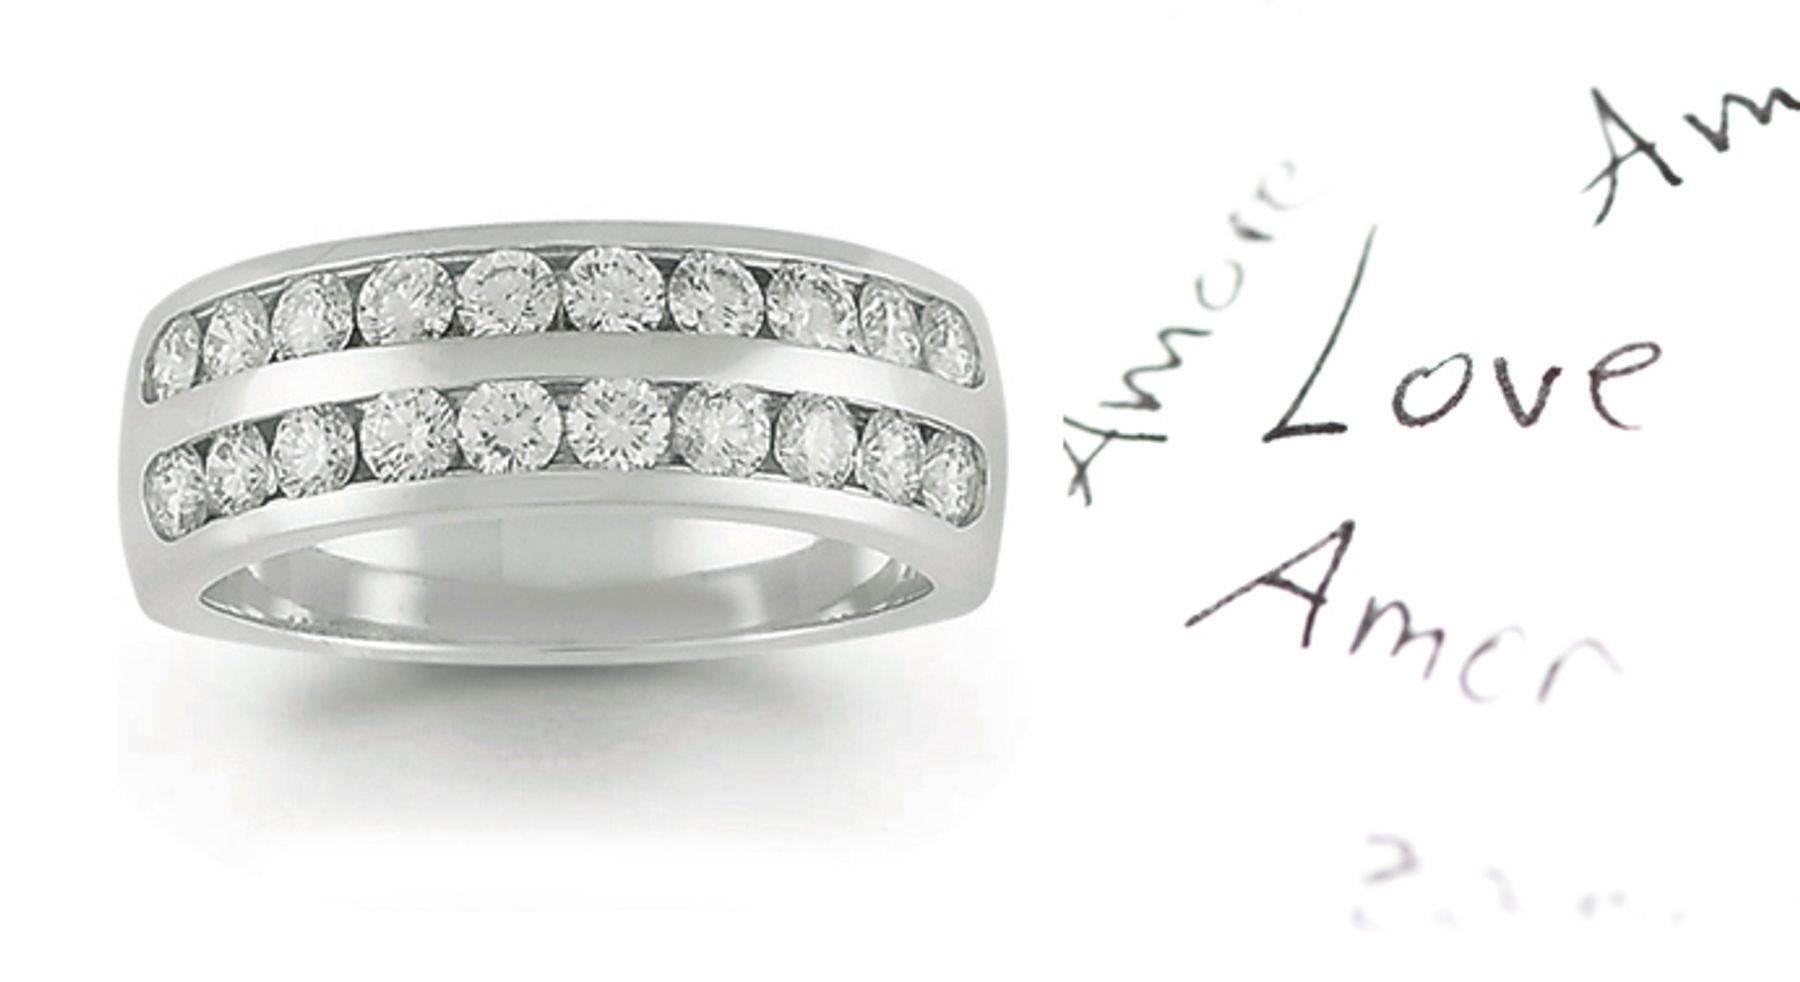 Two Row Channel Set Round Diamond Anniversary Band with 2.0 cts Round Diamonds in Gold